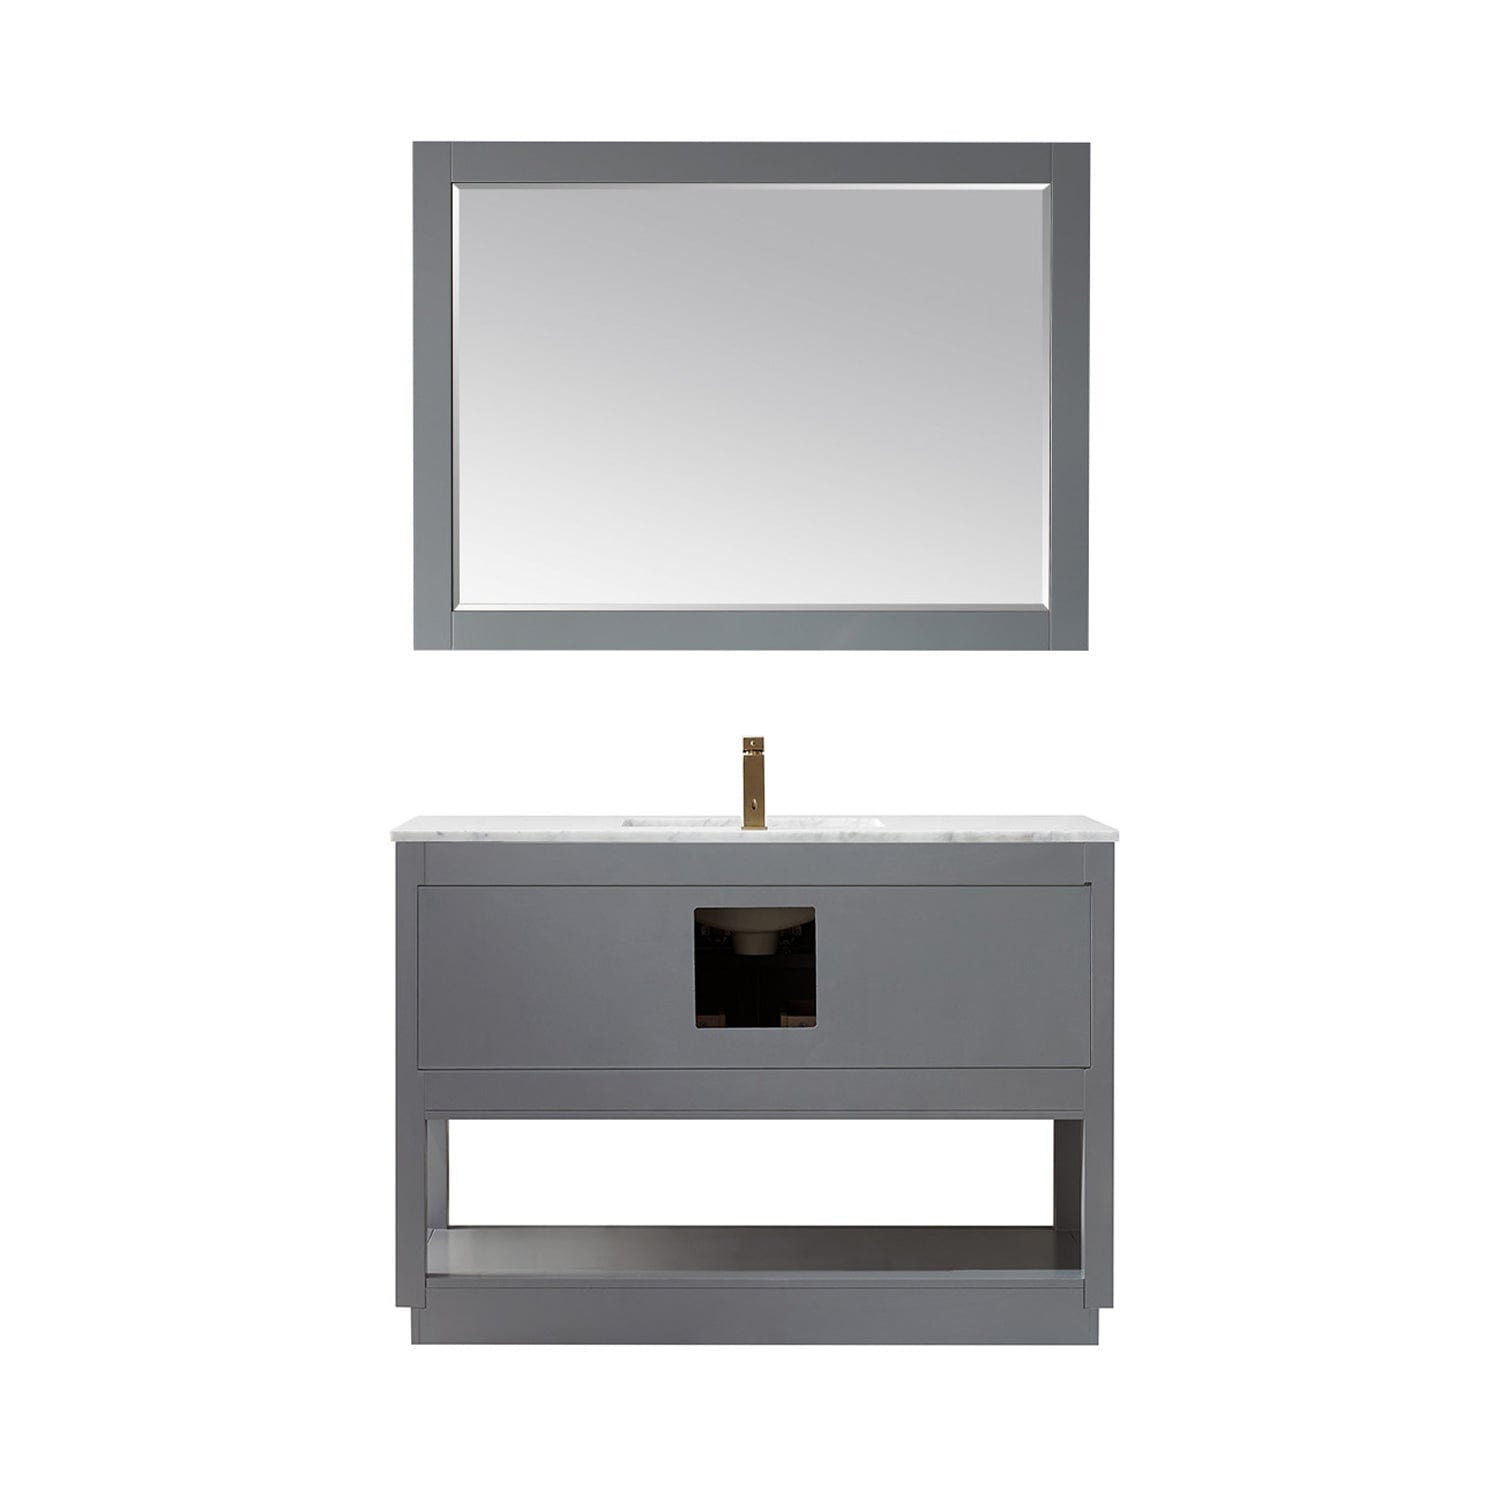 Altair Remi 48" Single Bathroom Vanity Set in Gray and Carrara White Marble Countertop with Mirror 532048-GR-CA - Molaix631112971454Vanity532048-GR-CA